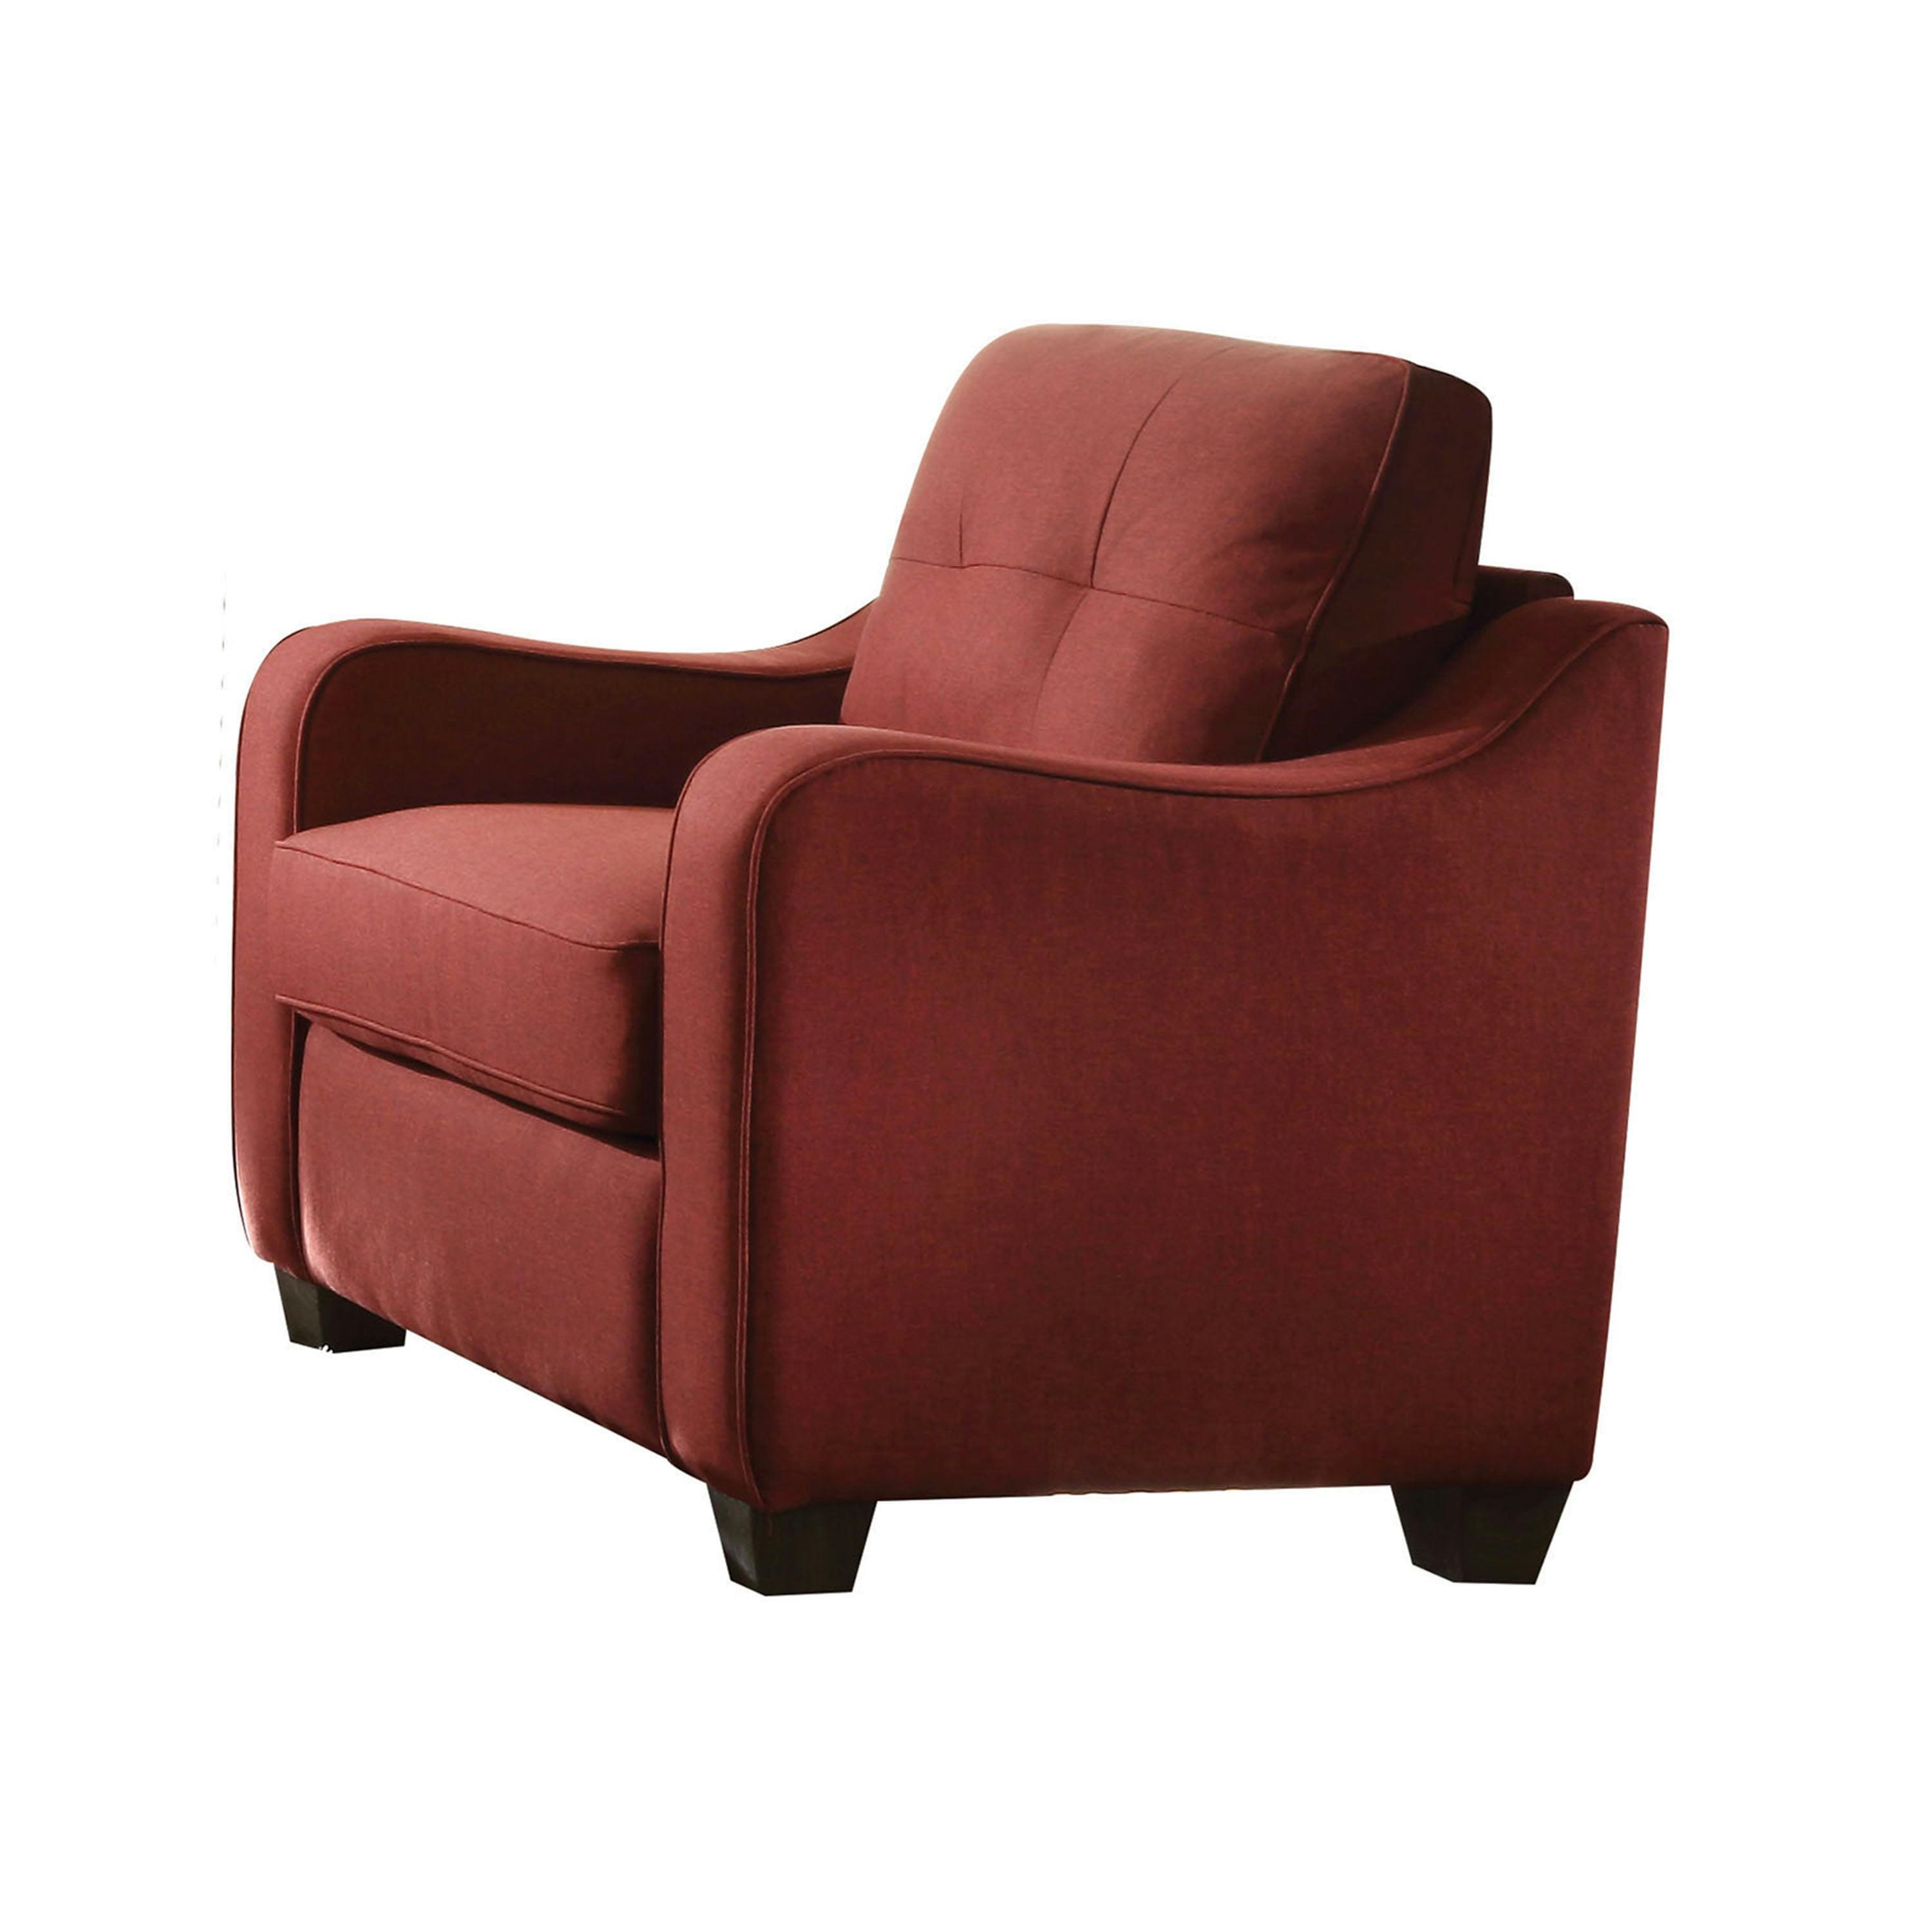 Cleavon II Modern Red Linen Chaise with Wood Grain Legs